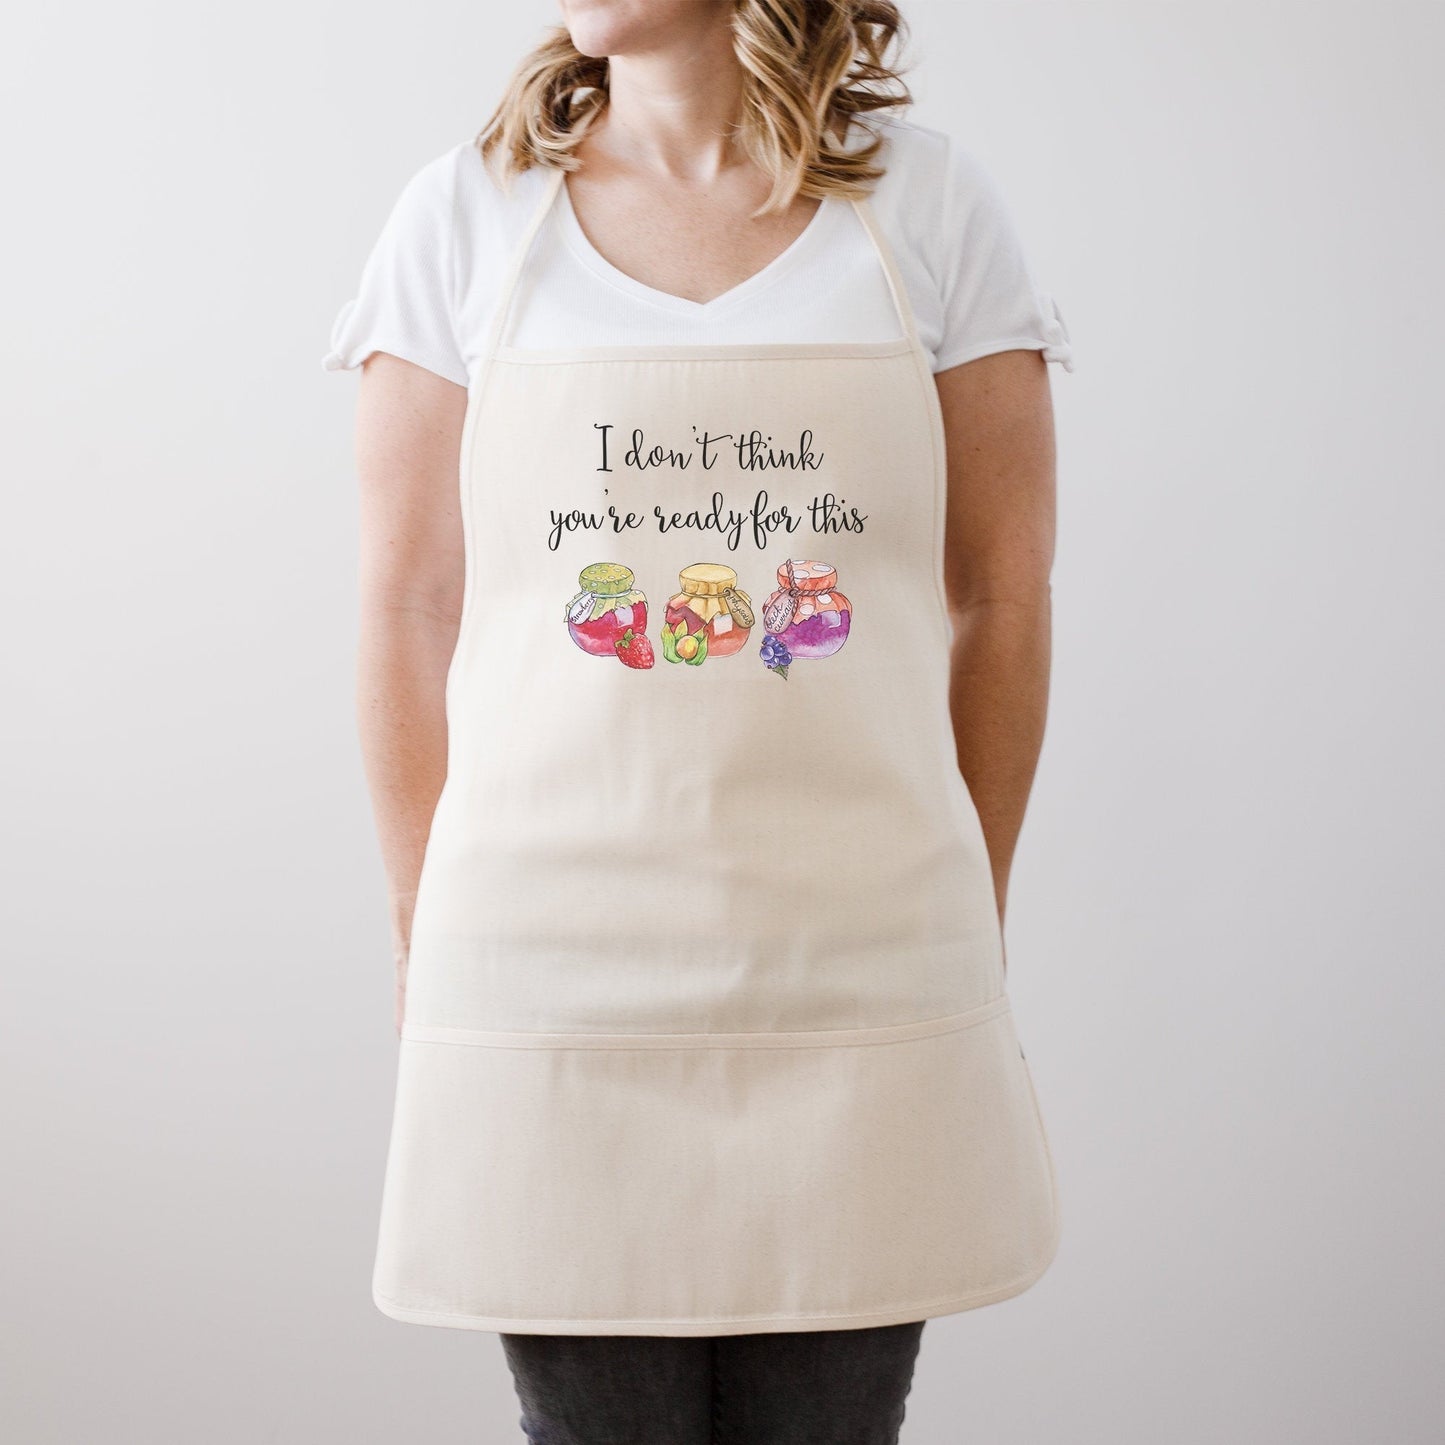 Humor Kitchen Apron, Funny Kitchen Aprons, Humor Apron Gifts